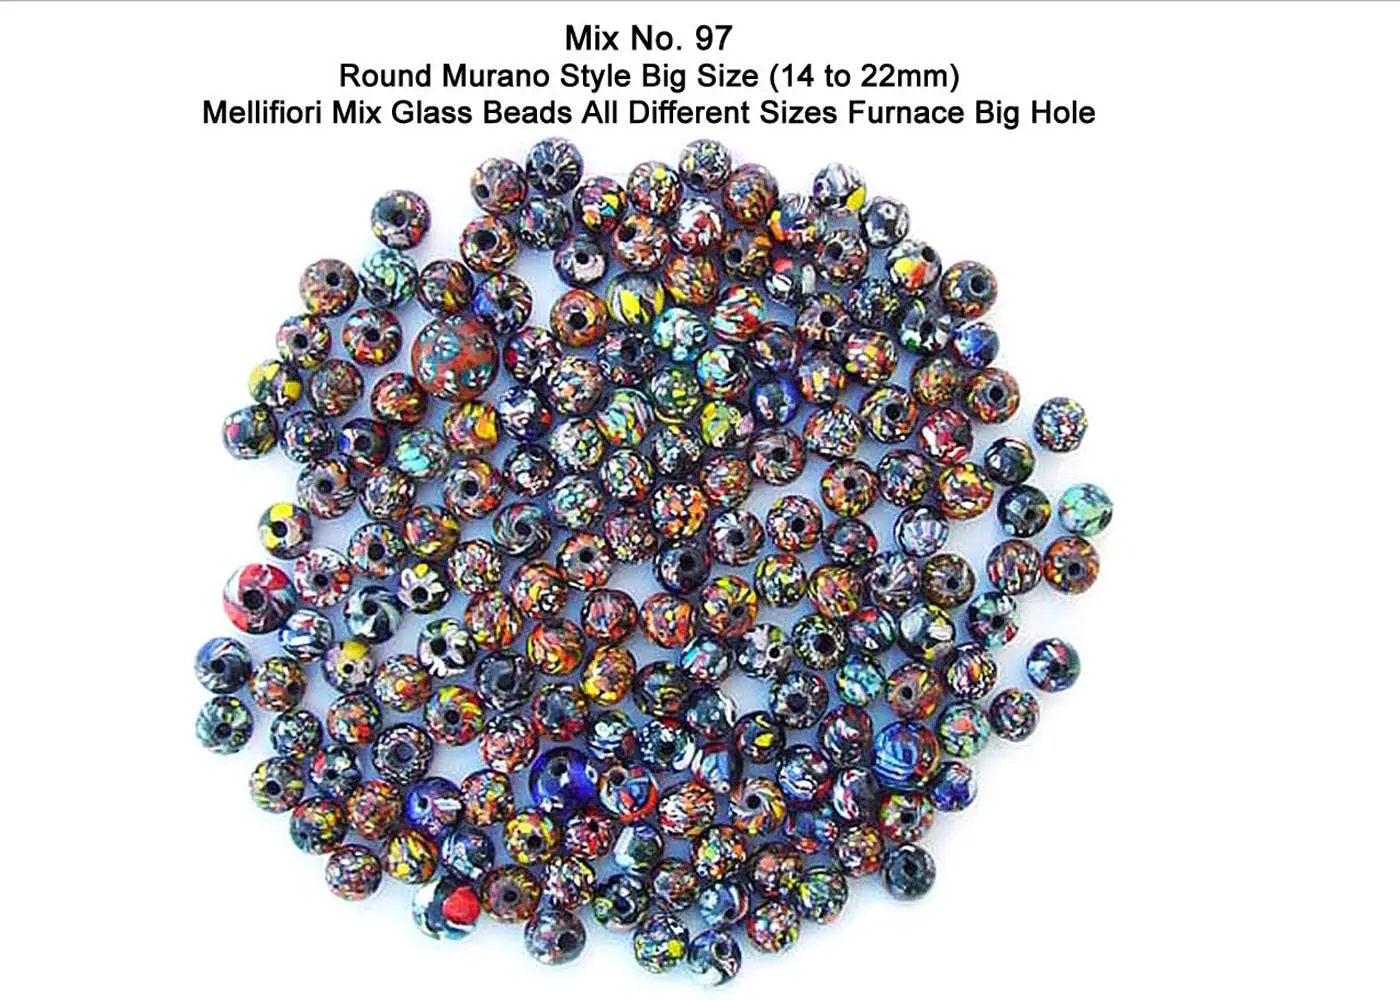 Round Murano style big size (14 to 22 mm) Mellifiori mix glass beads all different size furnace big hole